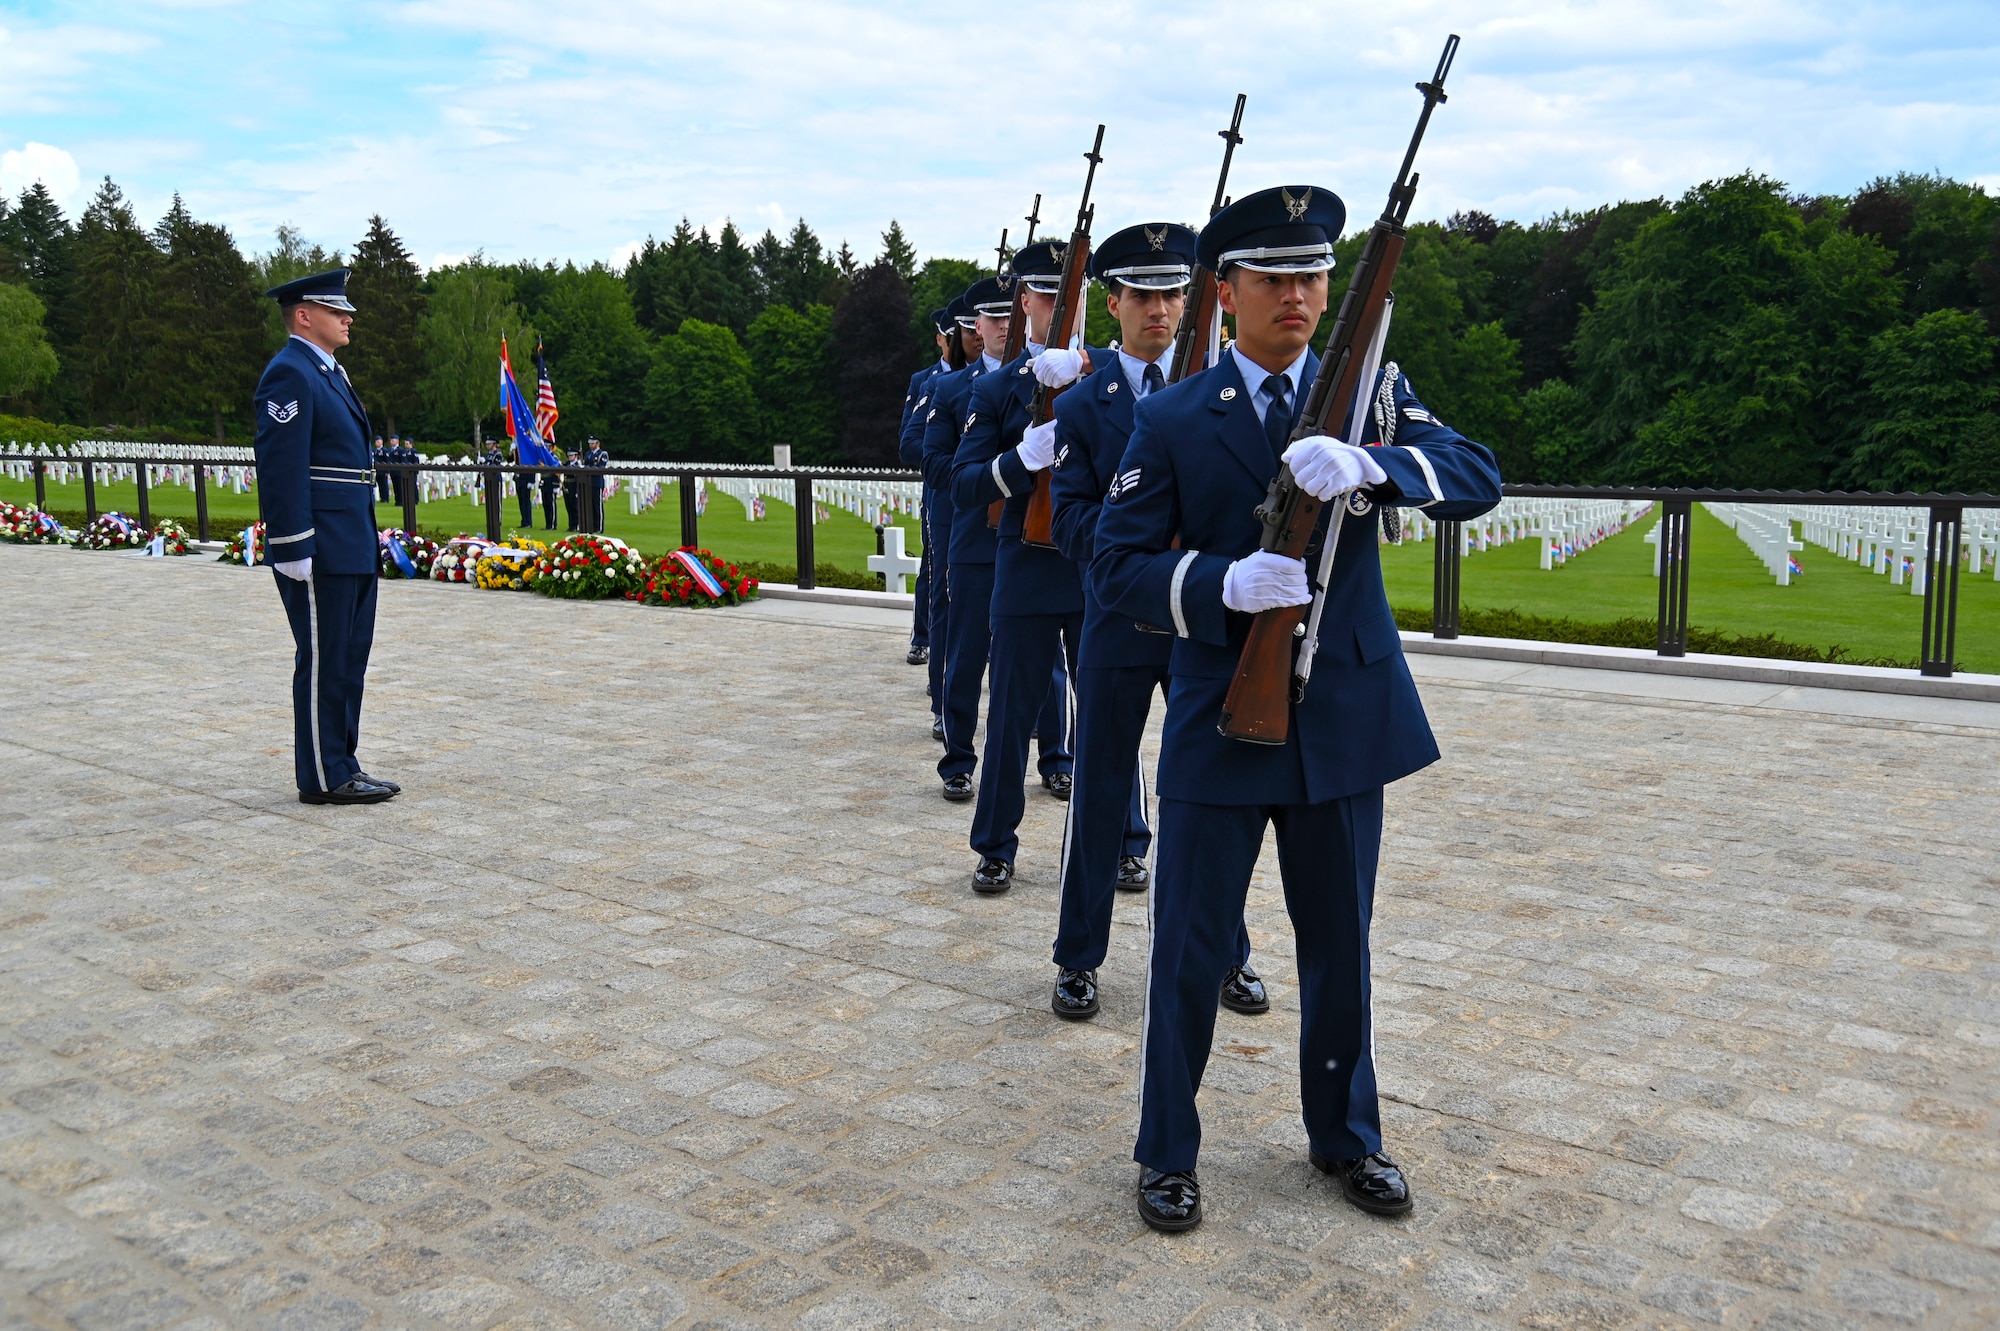 The 786th Force Support Squadron Firing Detail prepare to fire a three-volley salute during a Memorial Day event at the Luxembourg American Military cemetery in Luxembourg on May 28, 2022. The three-volley salute involved seven members firing three times in unison for a total of 21 rounds fired. (U.S. Air Force photo by Airman 1st Class Jessica Sanchez-Chen)